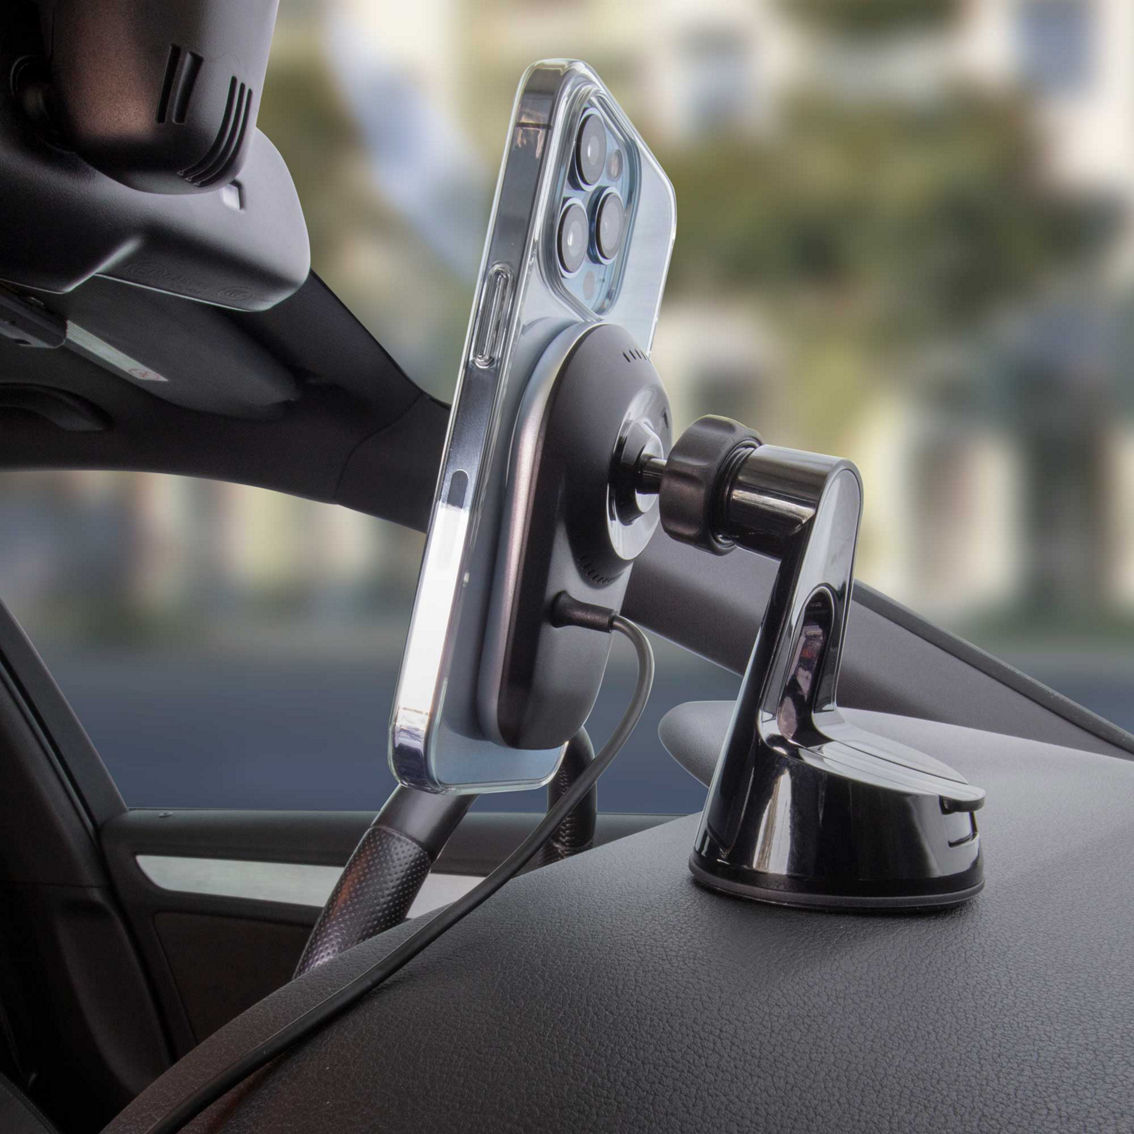 Scosche MagicMount Pro Charge5 MagSafe Wireless Charging Window/Dash Phone Mount - Image 3 of 6